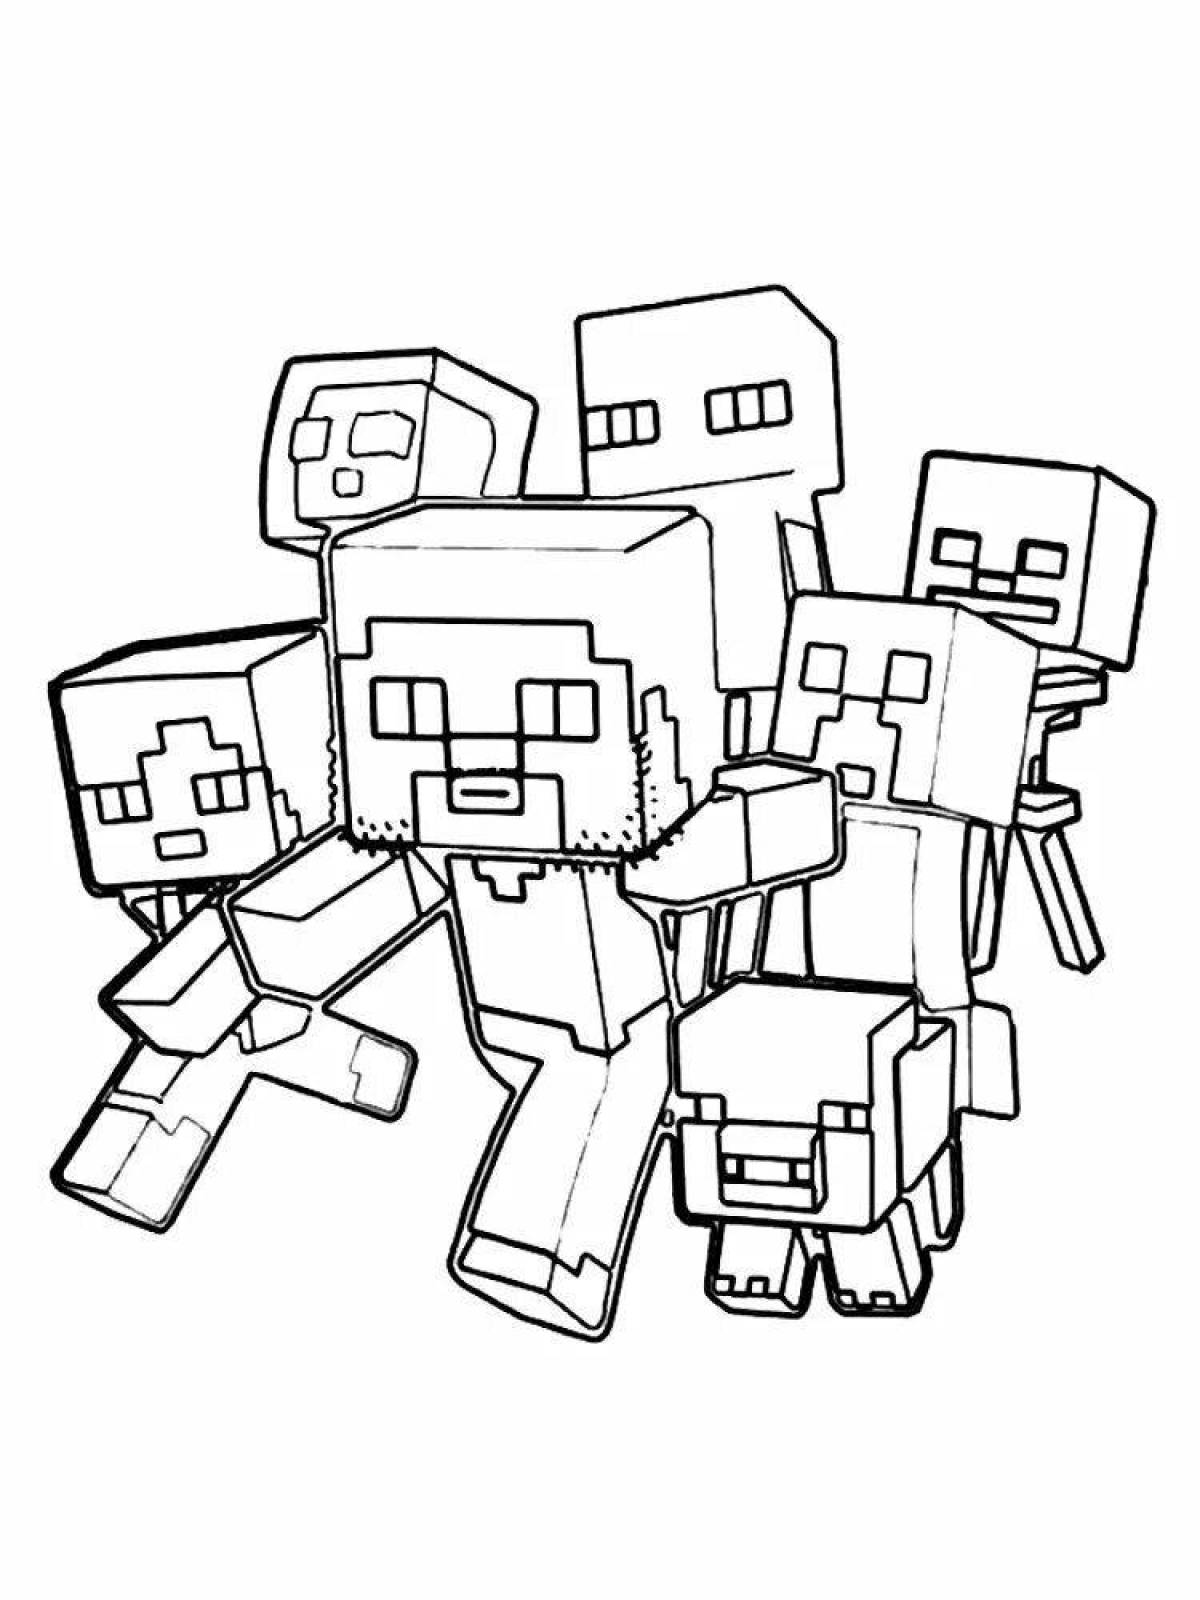 Awesome minecraft coloring book